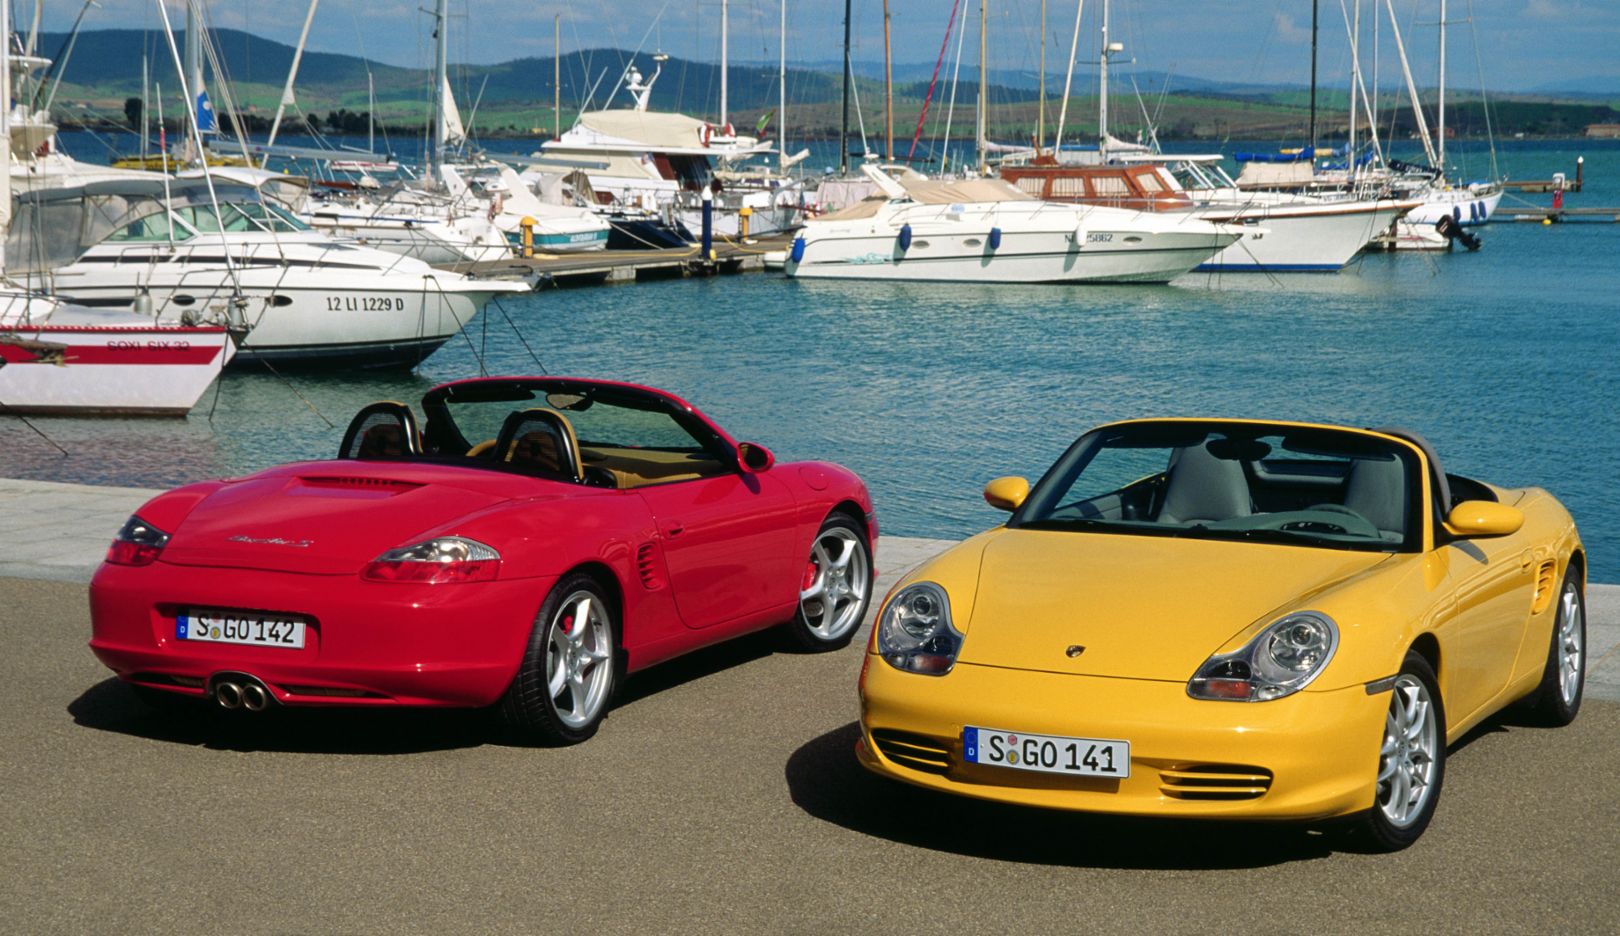 986 generation: model years 1997–2005. A total of 164,874 units of the first Boxster generation – 986 – were built.